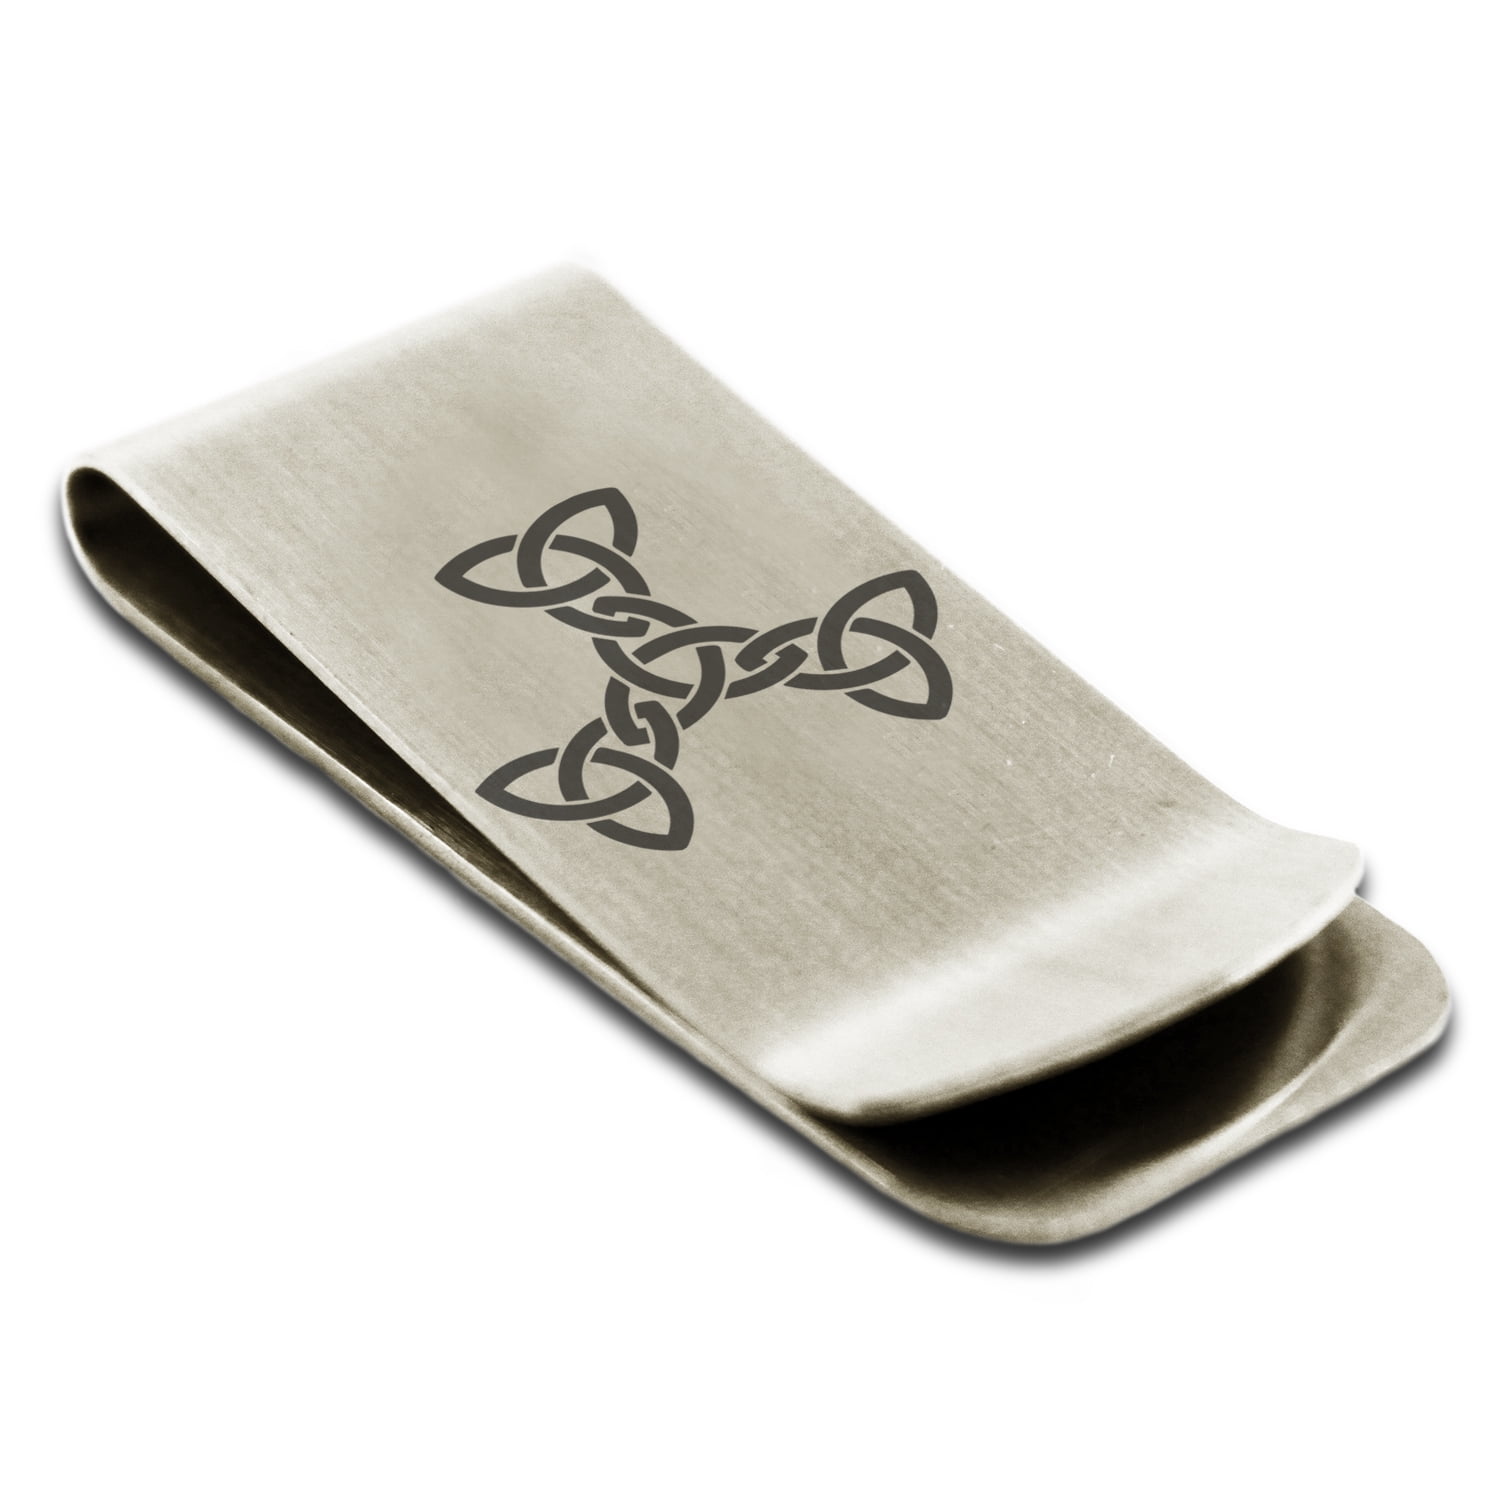 Stainless Steel Celtic Triquetra Interlaced Knot Symbol Engraved Money Clip Credit Card Holder 